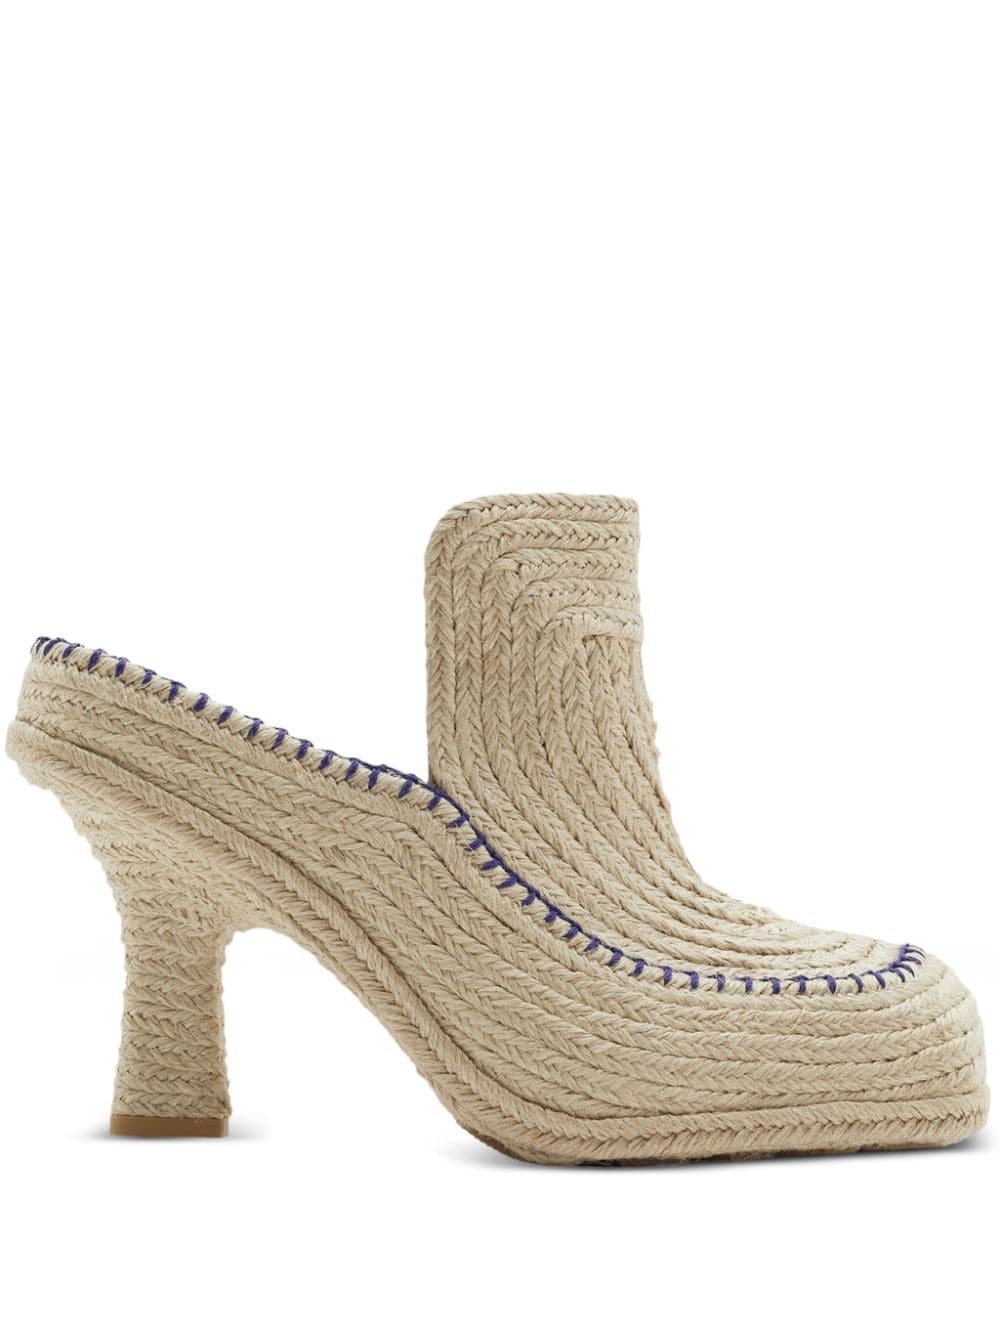 Cord woven mules